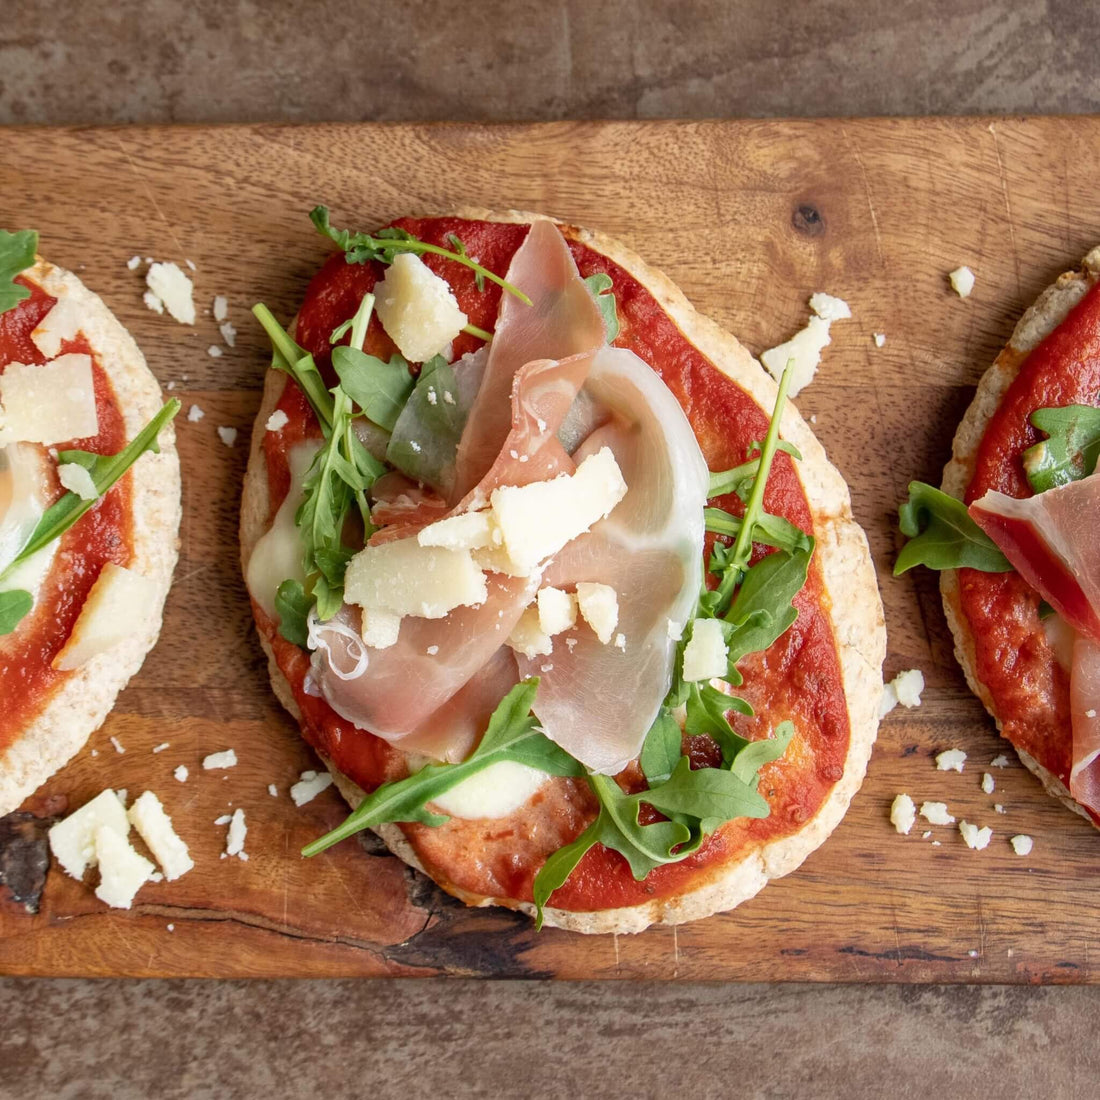 Pitza, pizza pitas, or what you may call them. These are super easy and kid-friendly pizza alternatives that take just a few minutes to make. They taste great and are so simple. Best way to make easy and fast pizza!